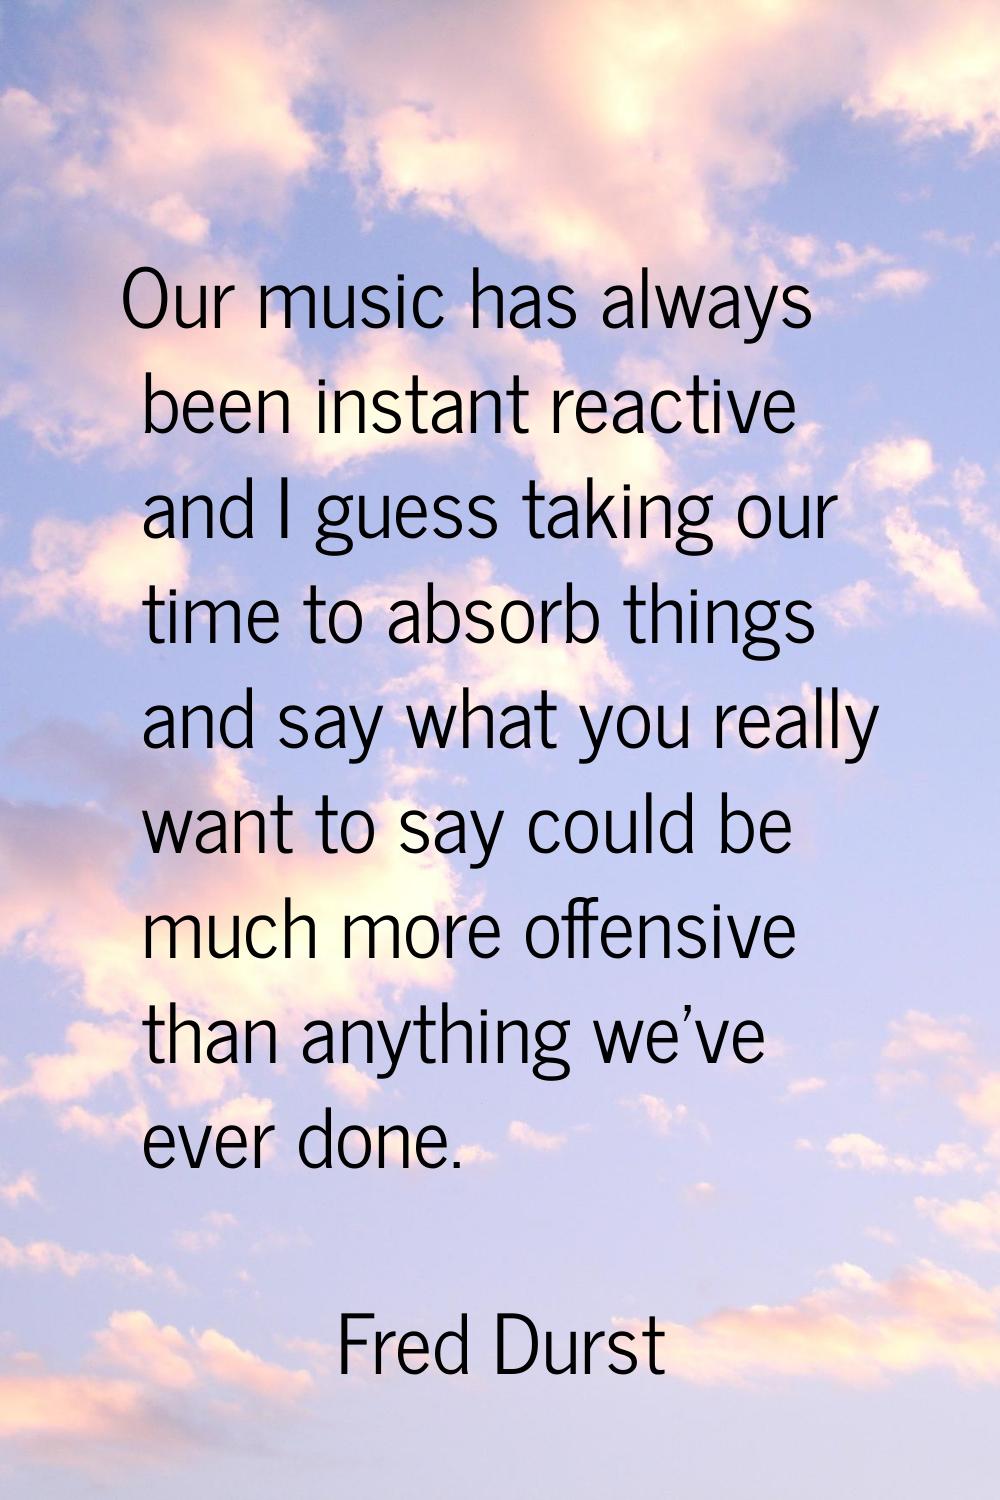 Our music has always been instant reactive and I guess taking our time to absorb things and say wha